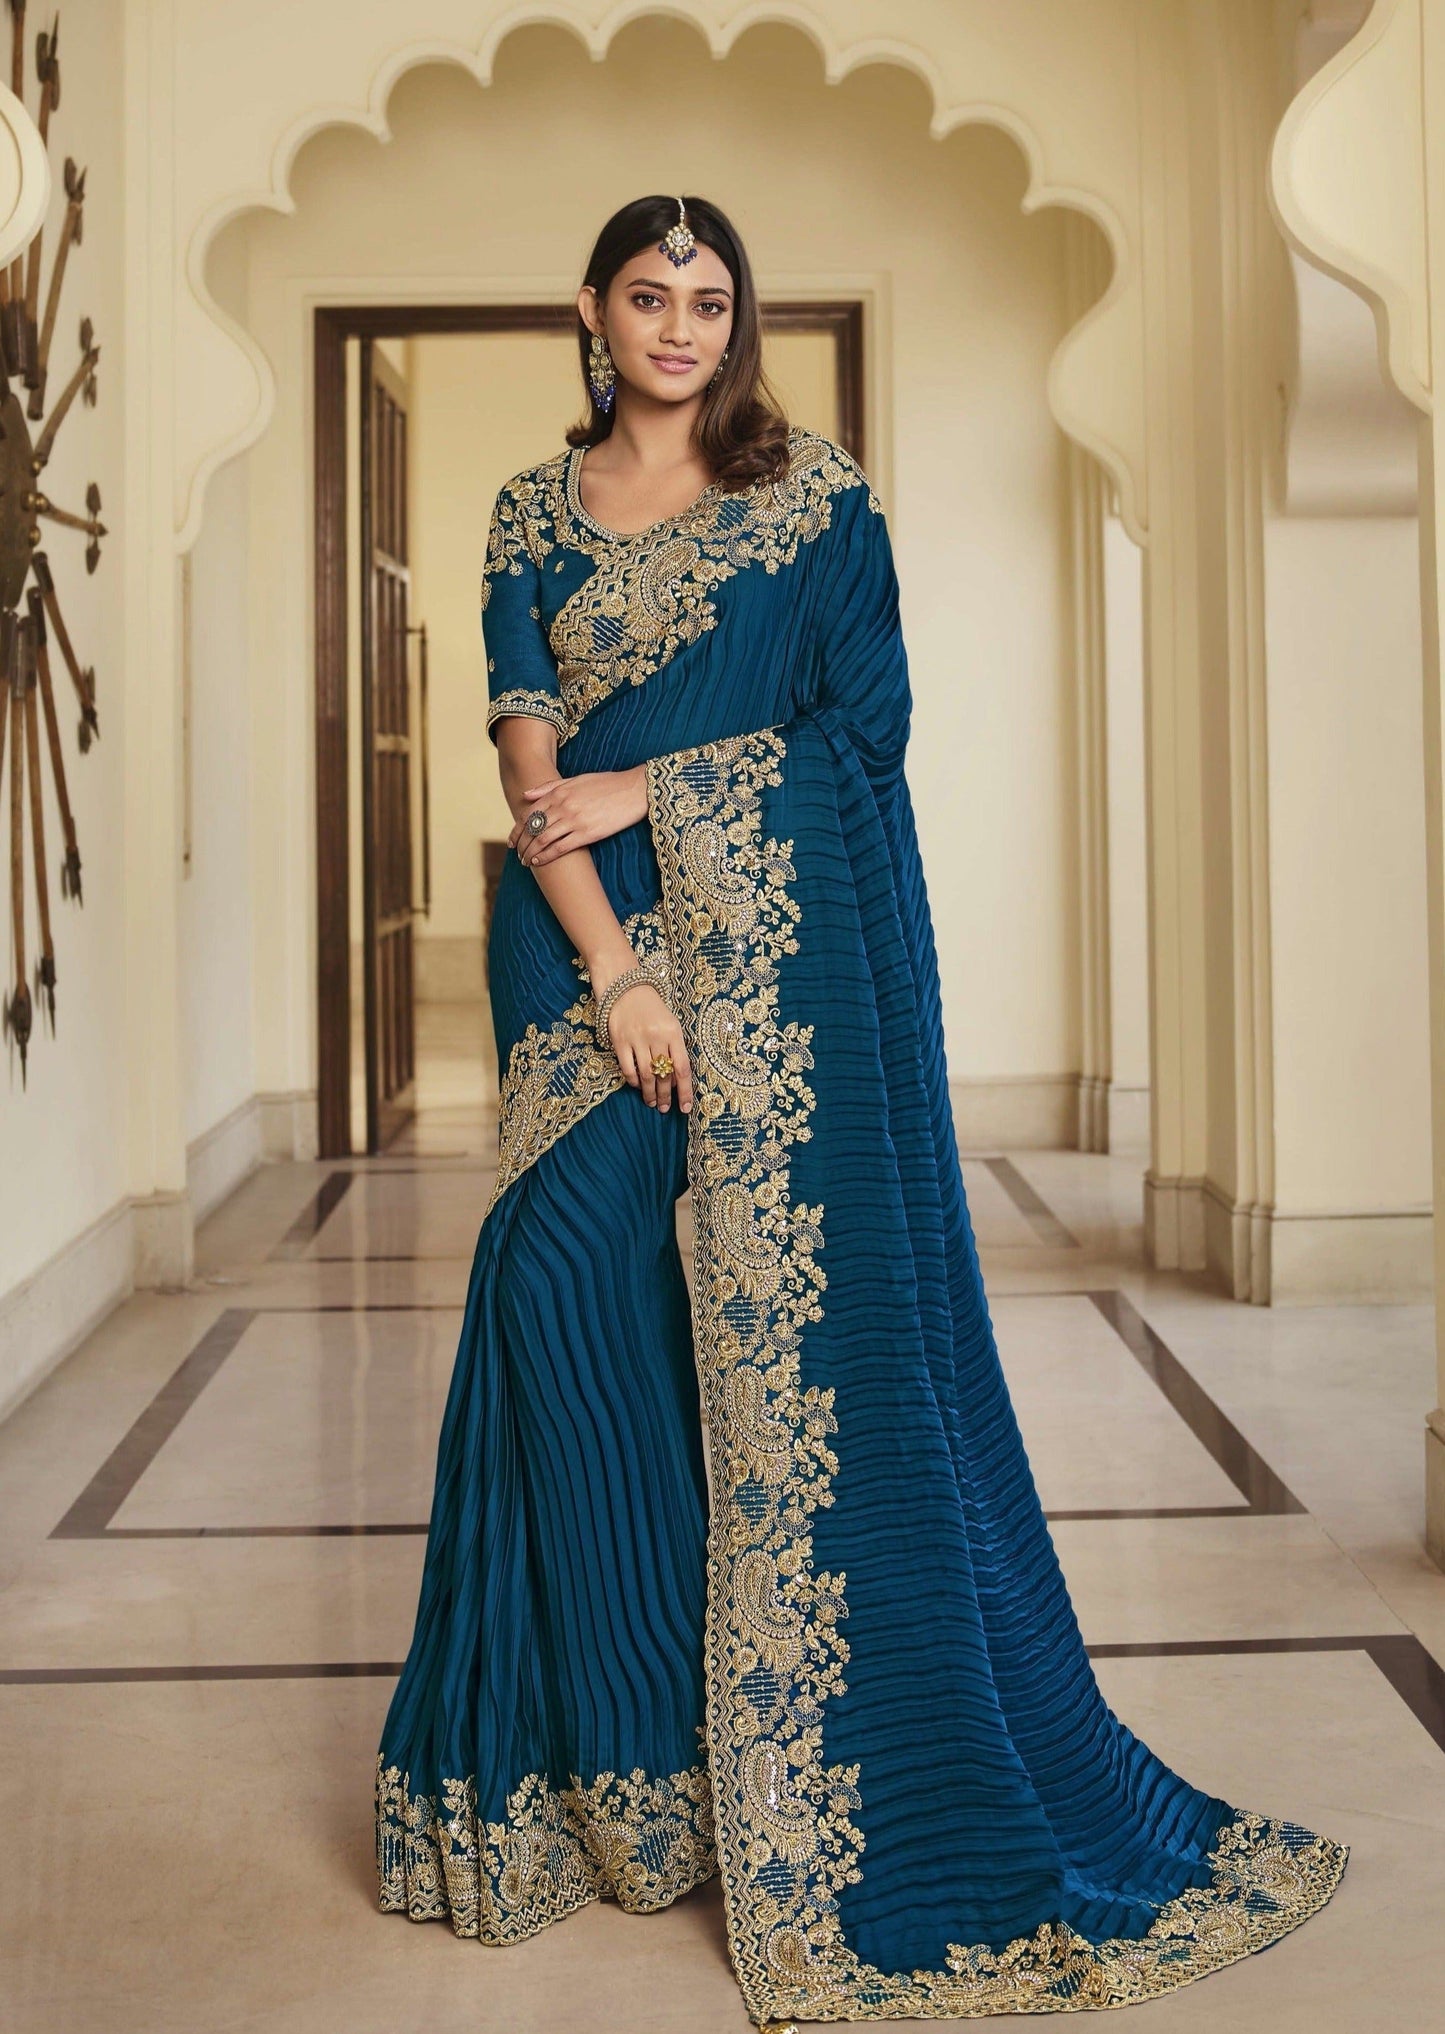 Sophisticated sarees